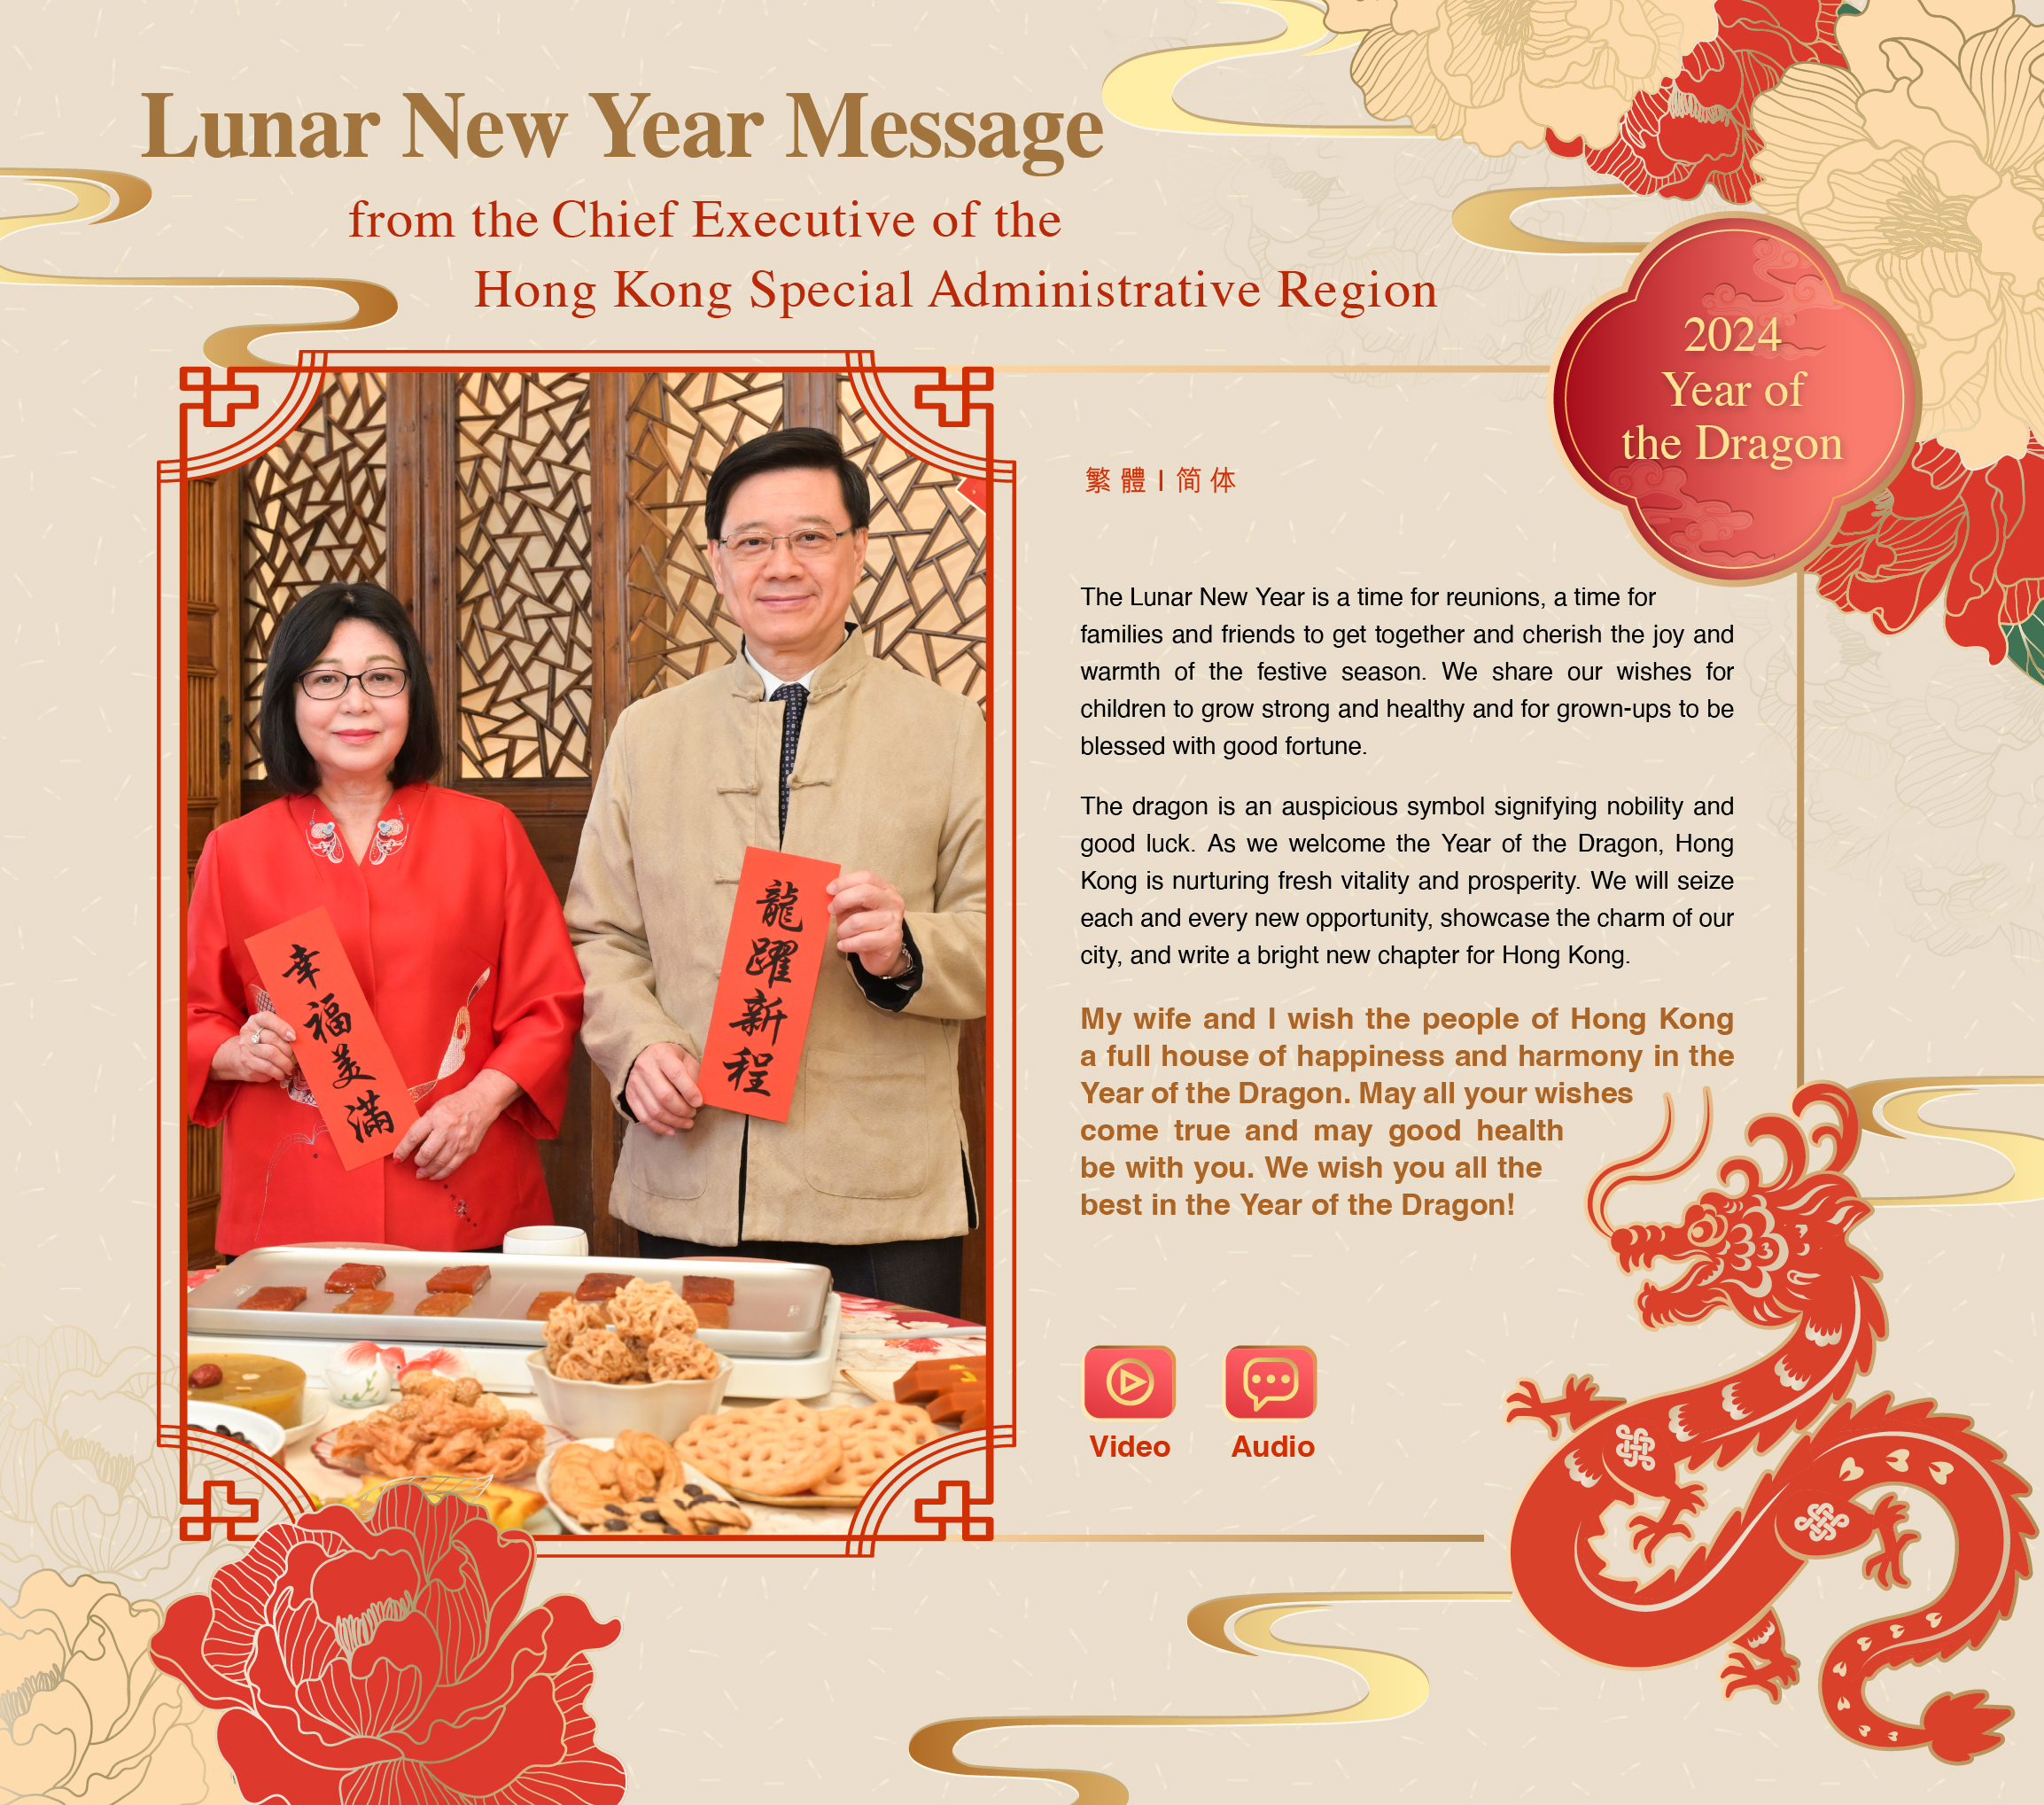 Lunnar New Year Message from the Chief Executive